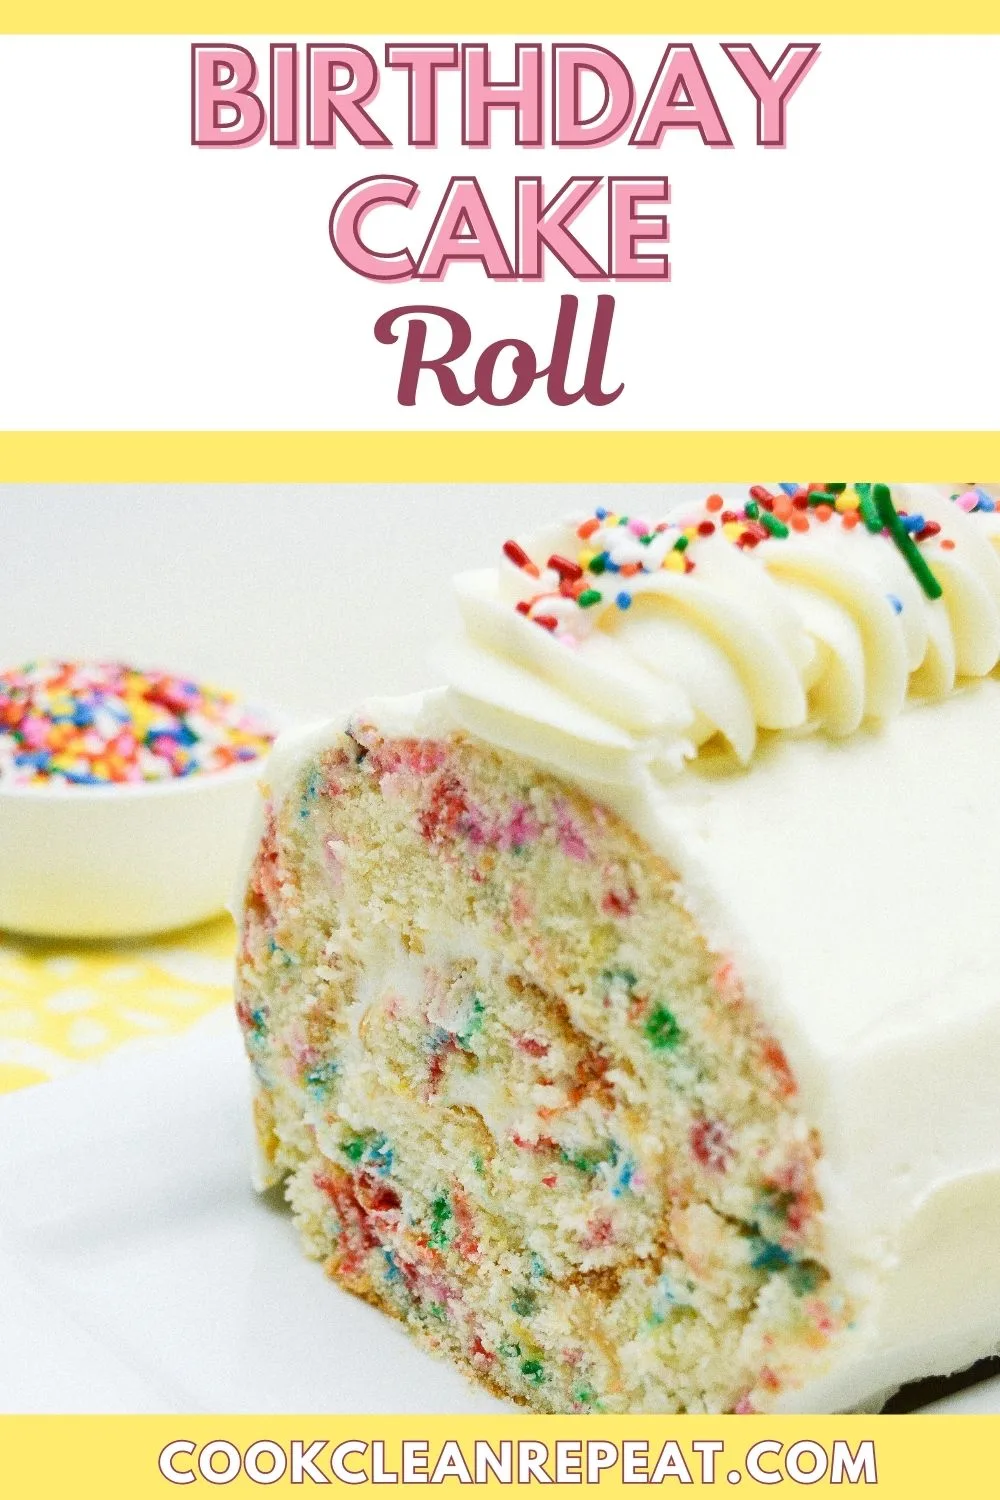 Jelly Roll Recipe for an 11x17 Inch Pan Recipe 